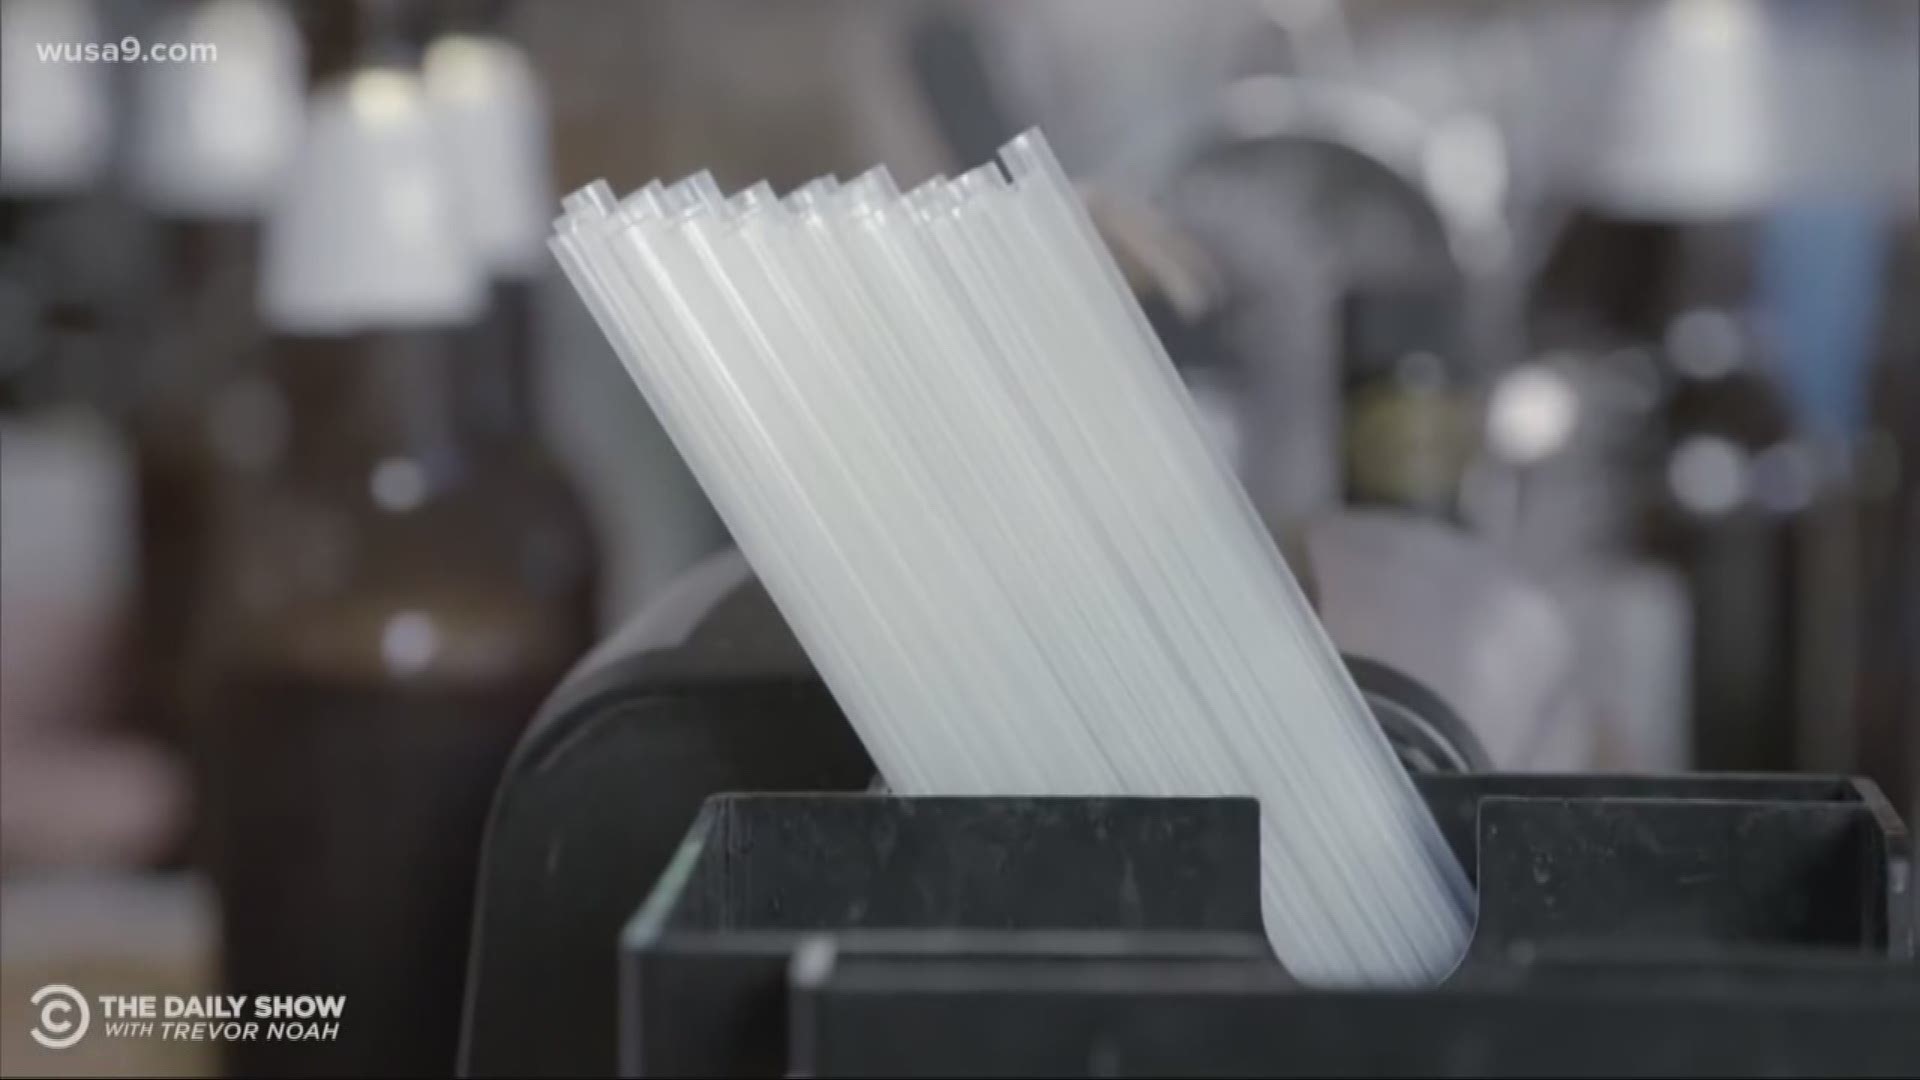 On Monday, the city starts fining businesses up to 800 dollars for giving out plastic straws and stirrers.